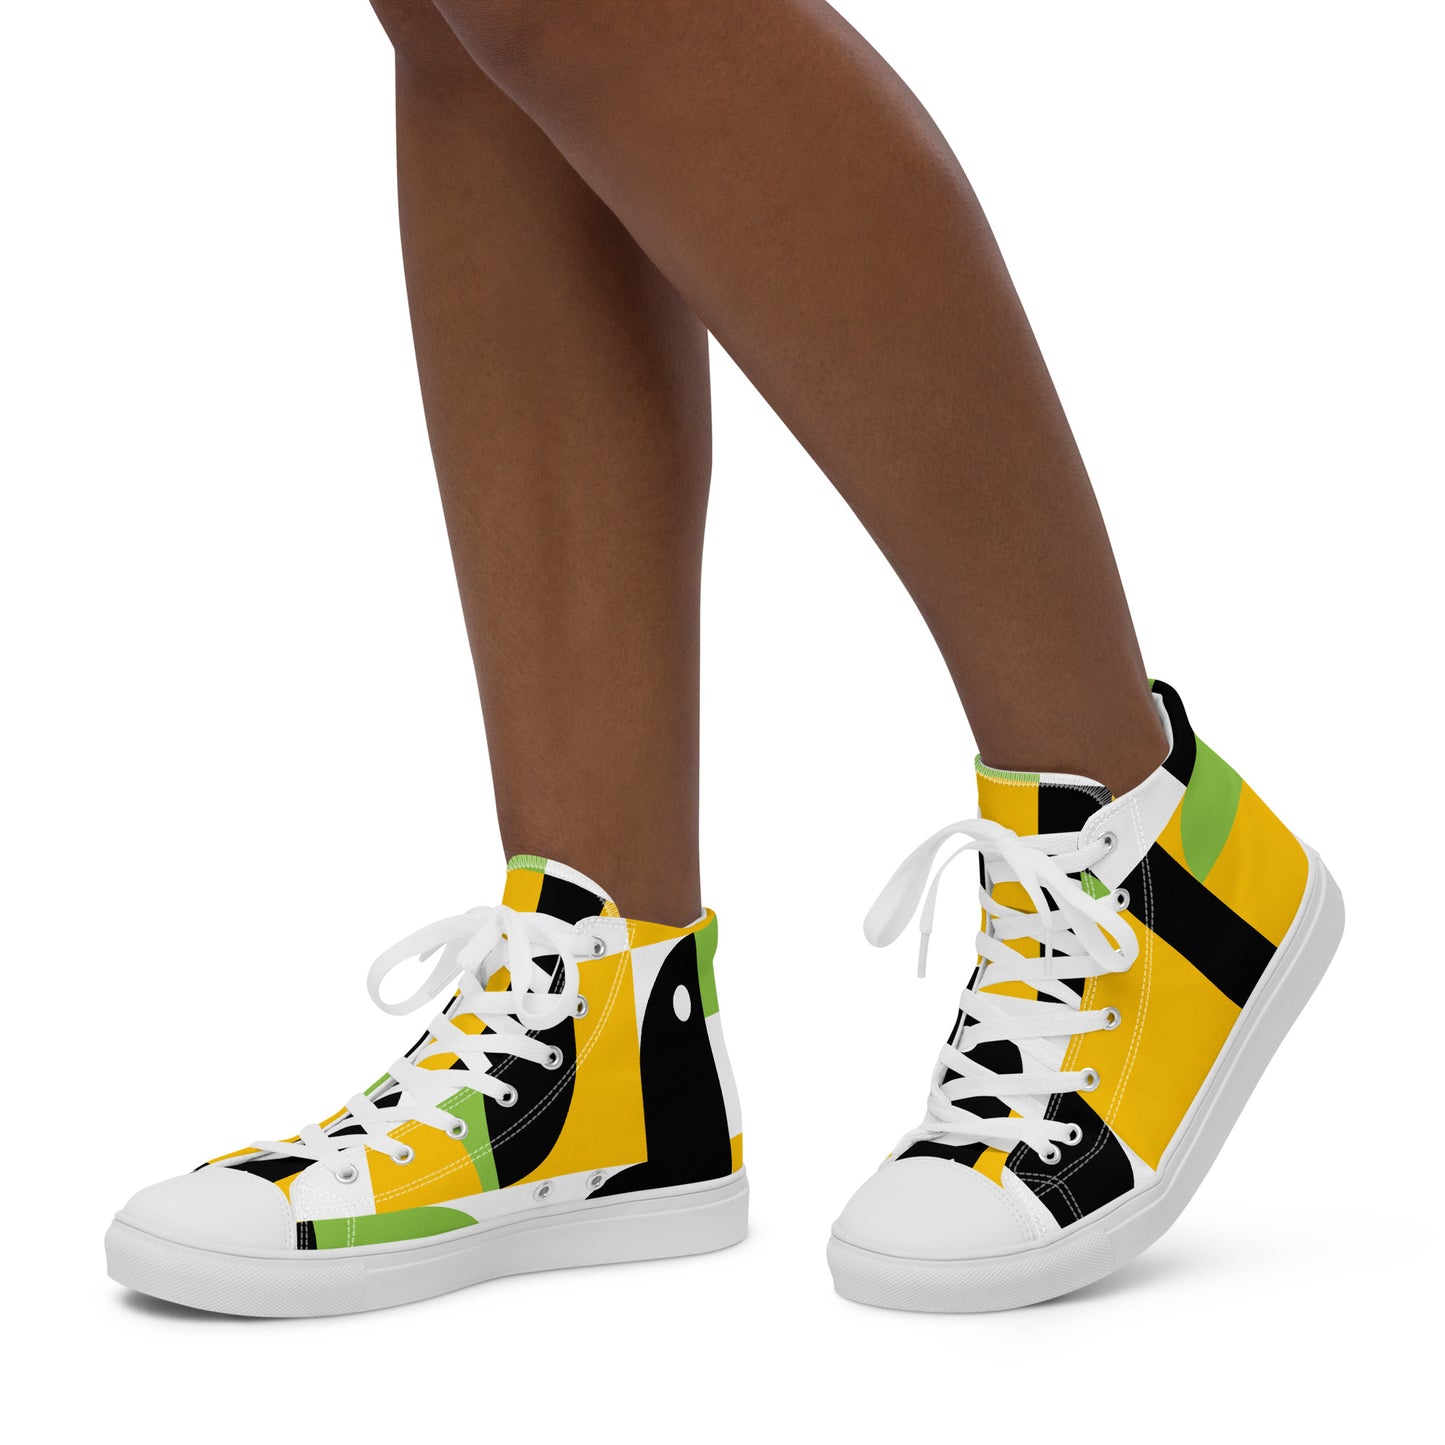 Women’s Taxi high top canvas shoes